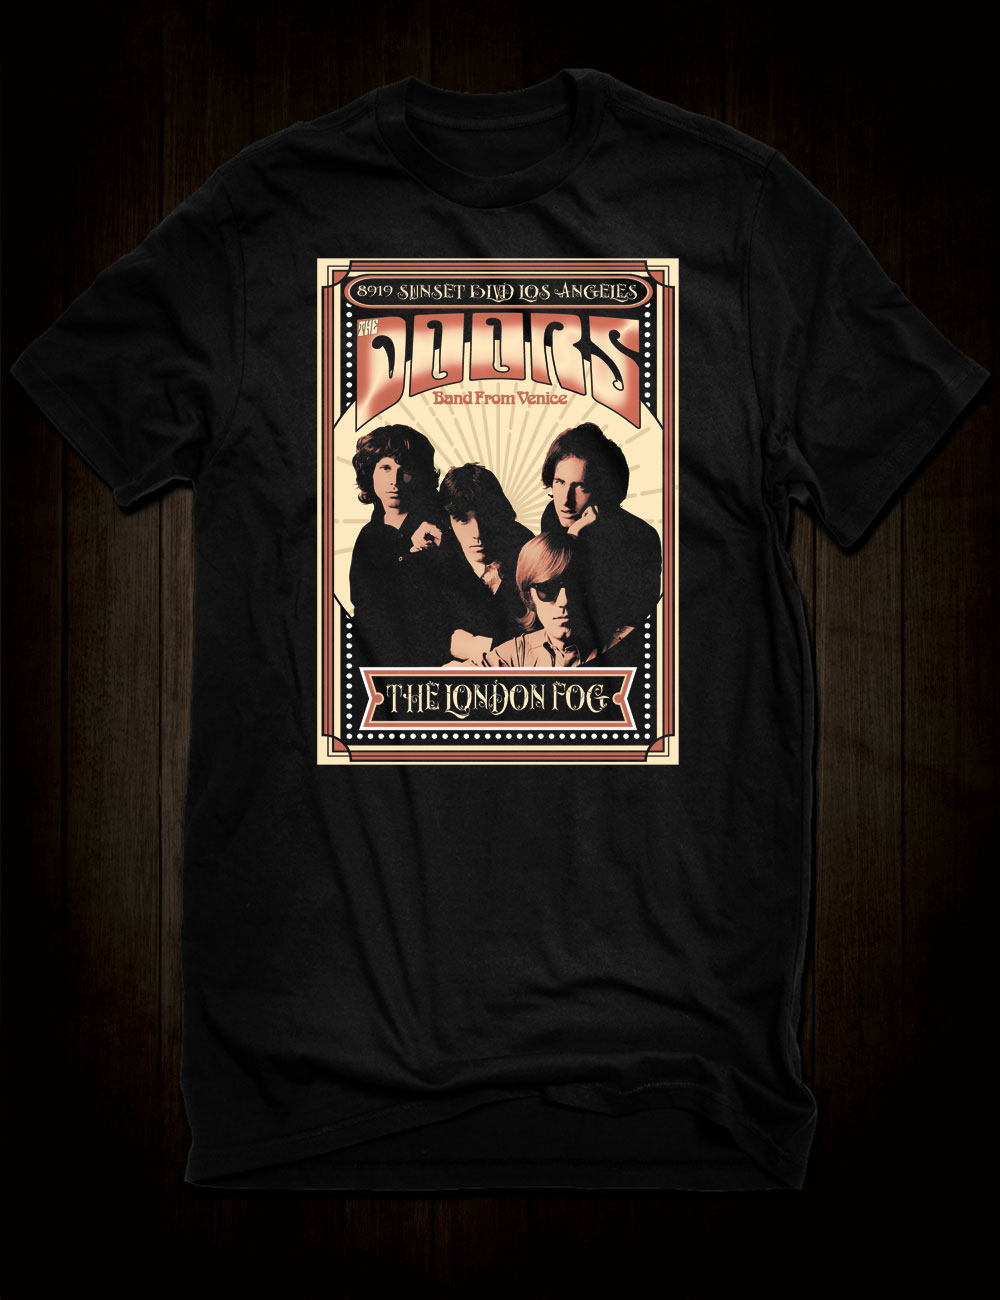 The Doors - Band From Venice T-Shirt - Hellwood Outfitters